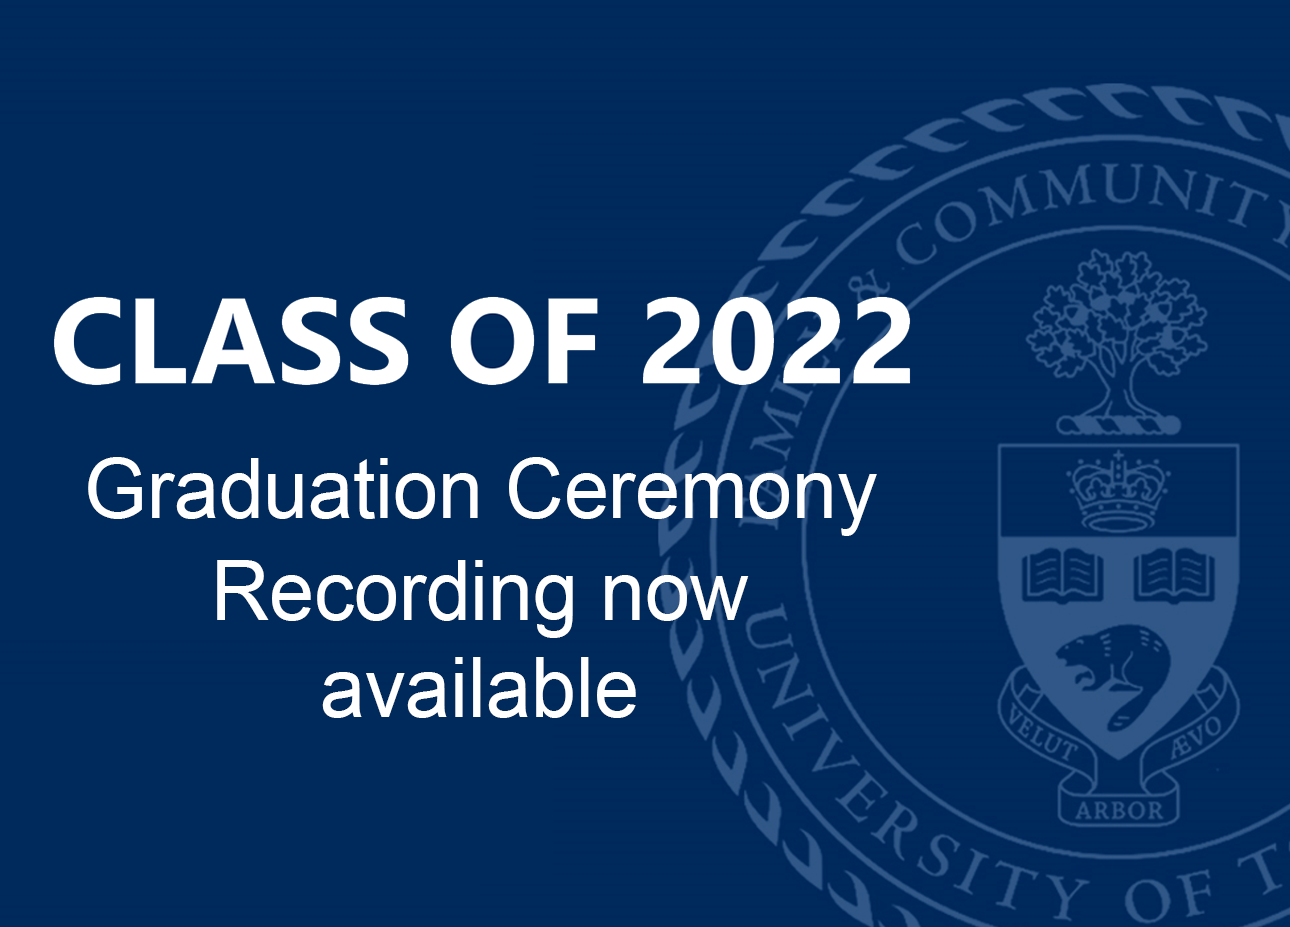 Class of 2022 Graduation Ceremony Recording now available